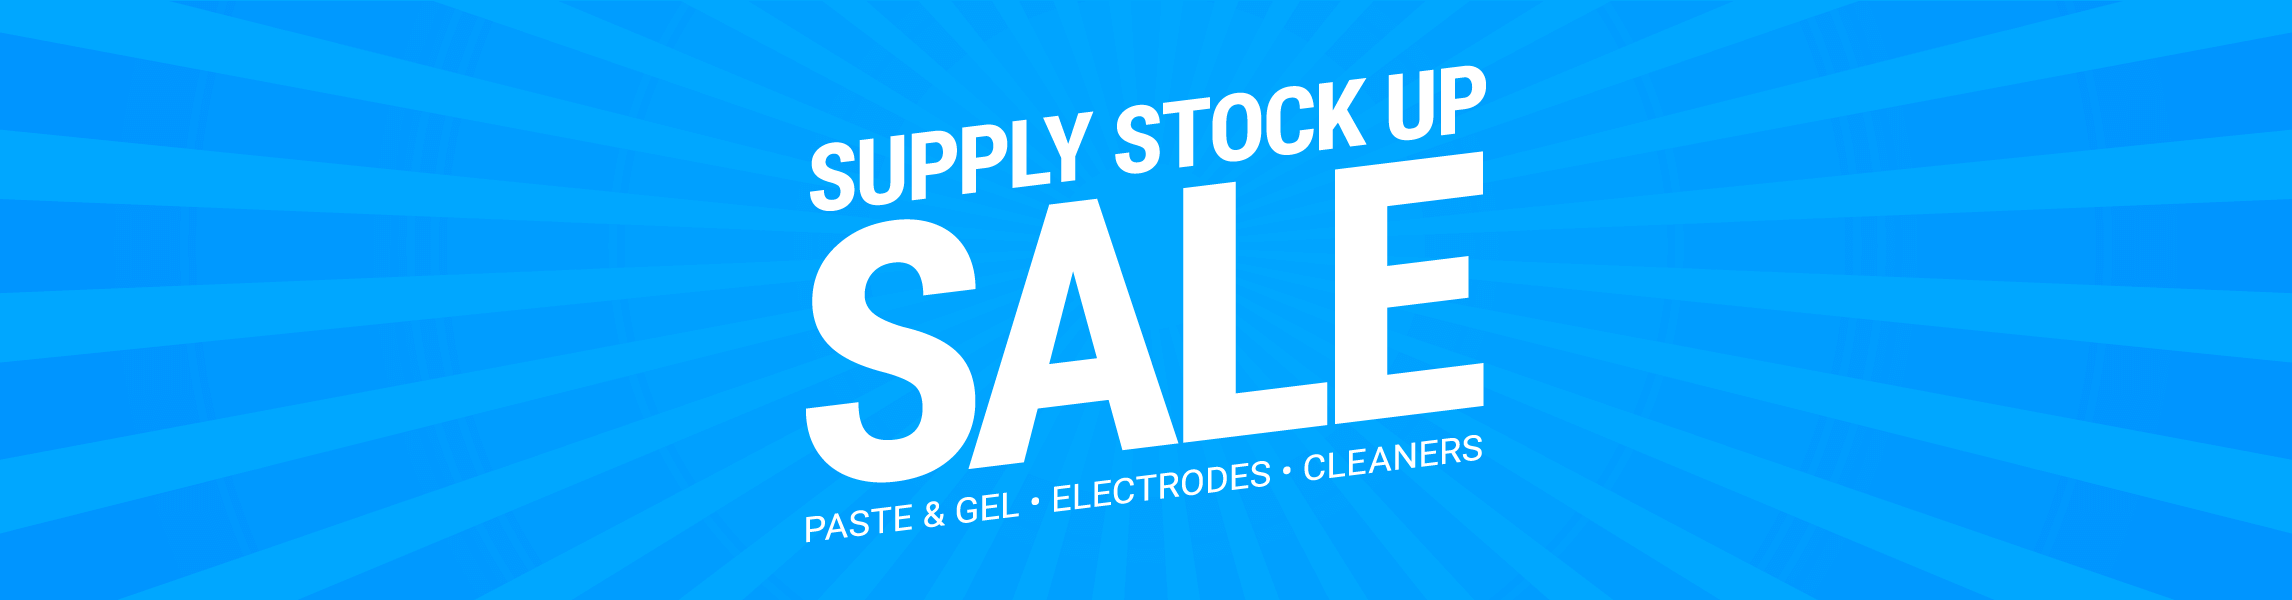 SUPPY STOCK UP SALE!